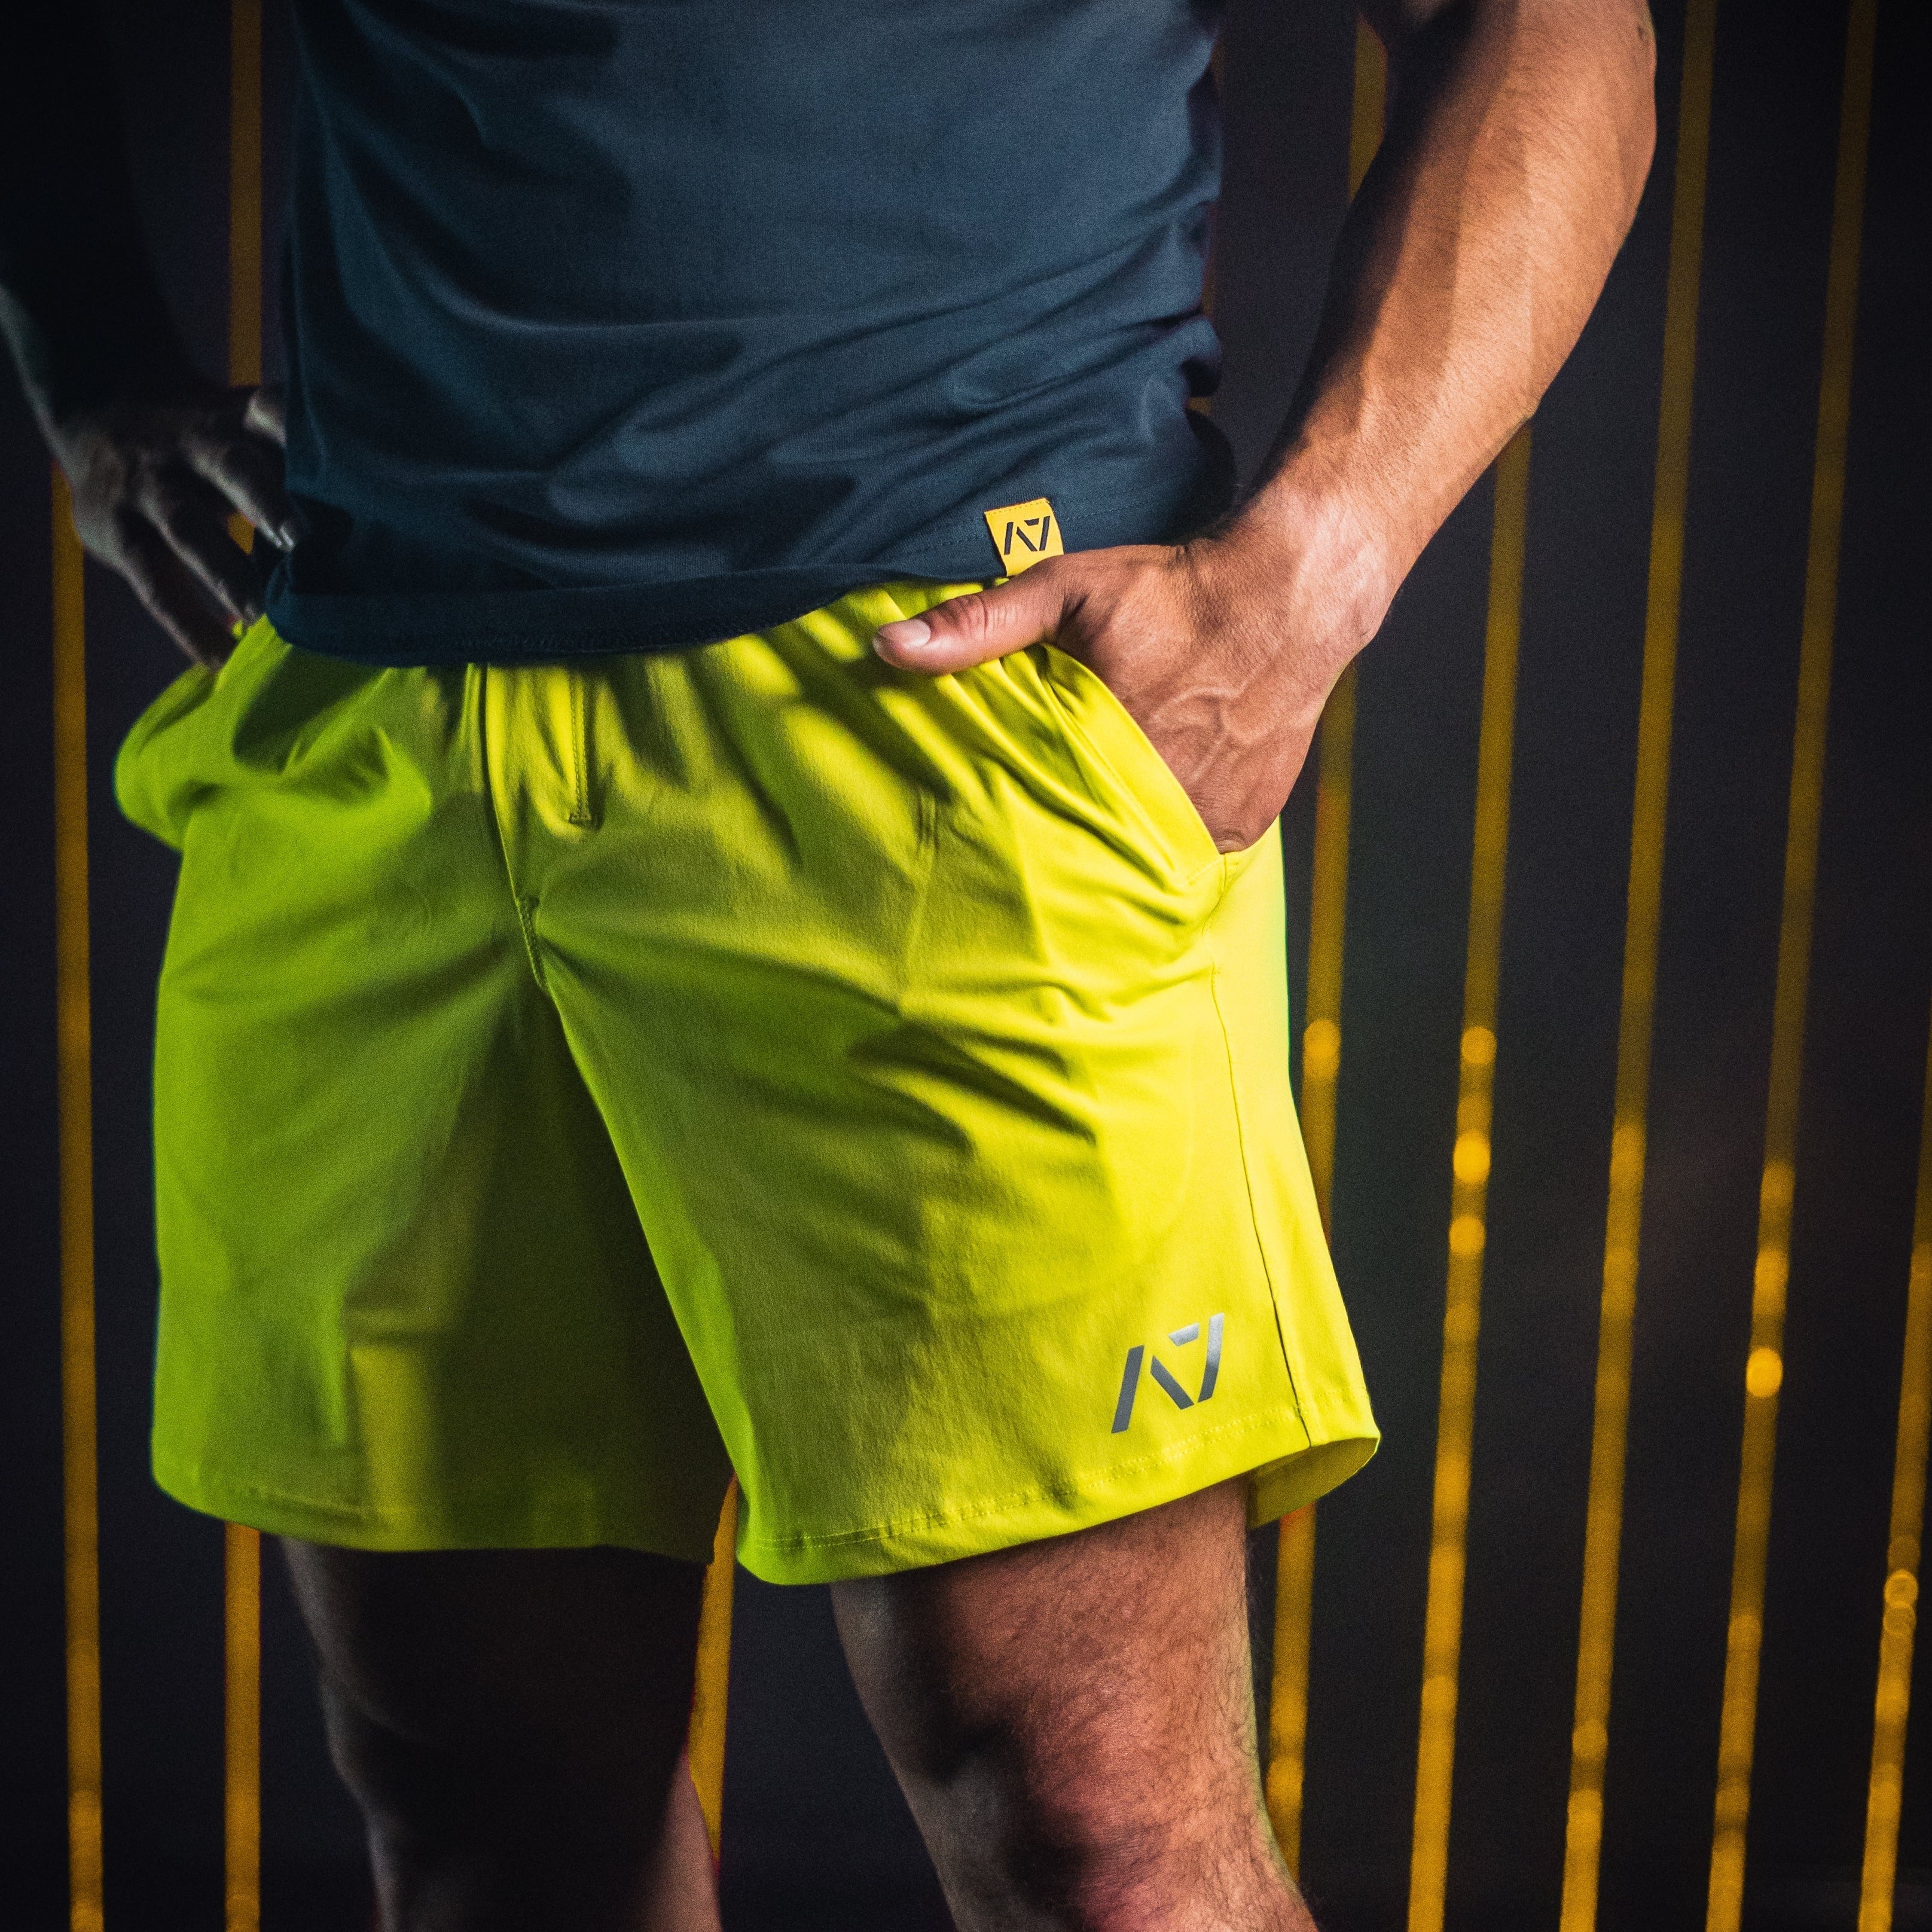 Electric Lemonade 360-GO shorts were created to provide the flexibility for all the movements in your training while offering the comfort and fit you have come to love through our squat shorts. Purchase 360-GO shorts from A7 UK and A7 Europe. 360-GO shorts are perfect for powerlifting and weightlifting training. Available in UK and Europe including France, Italy, Germany, the Netherlands, Sweden and Poland.